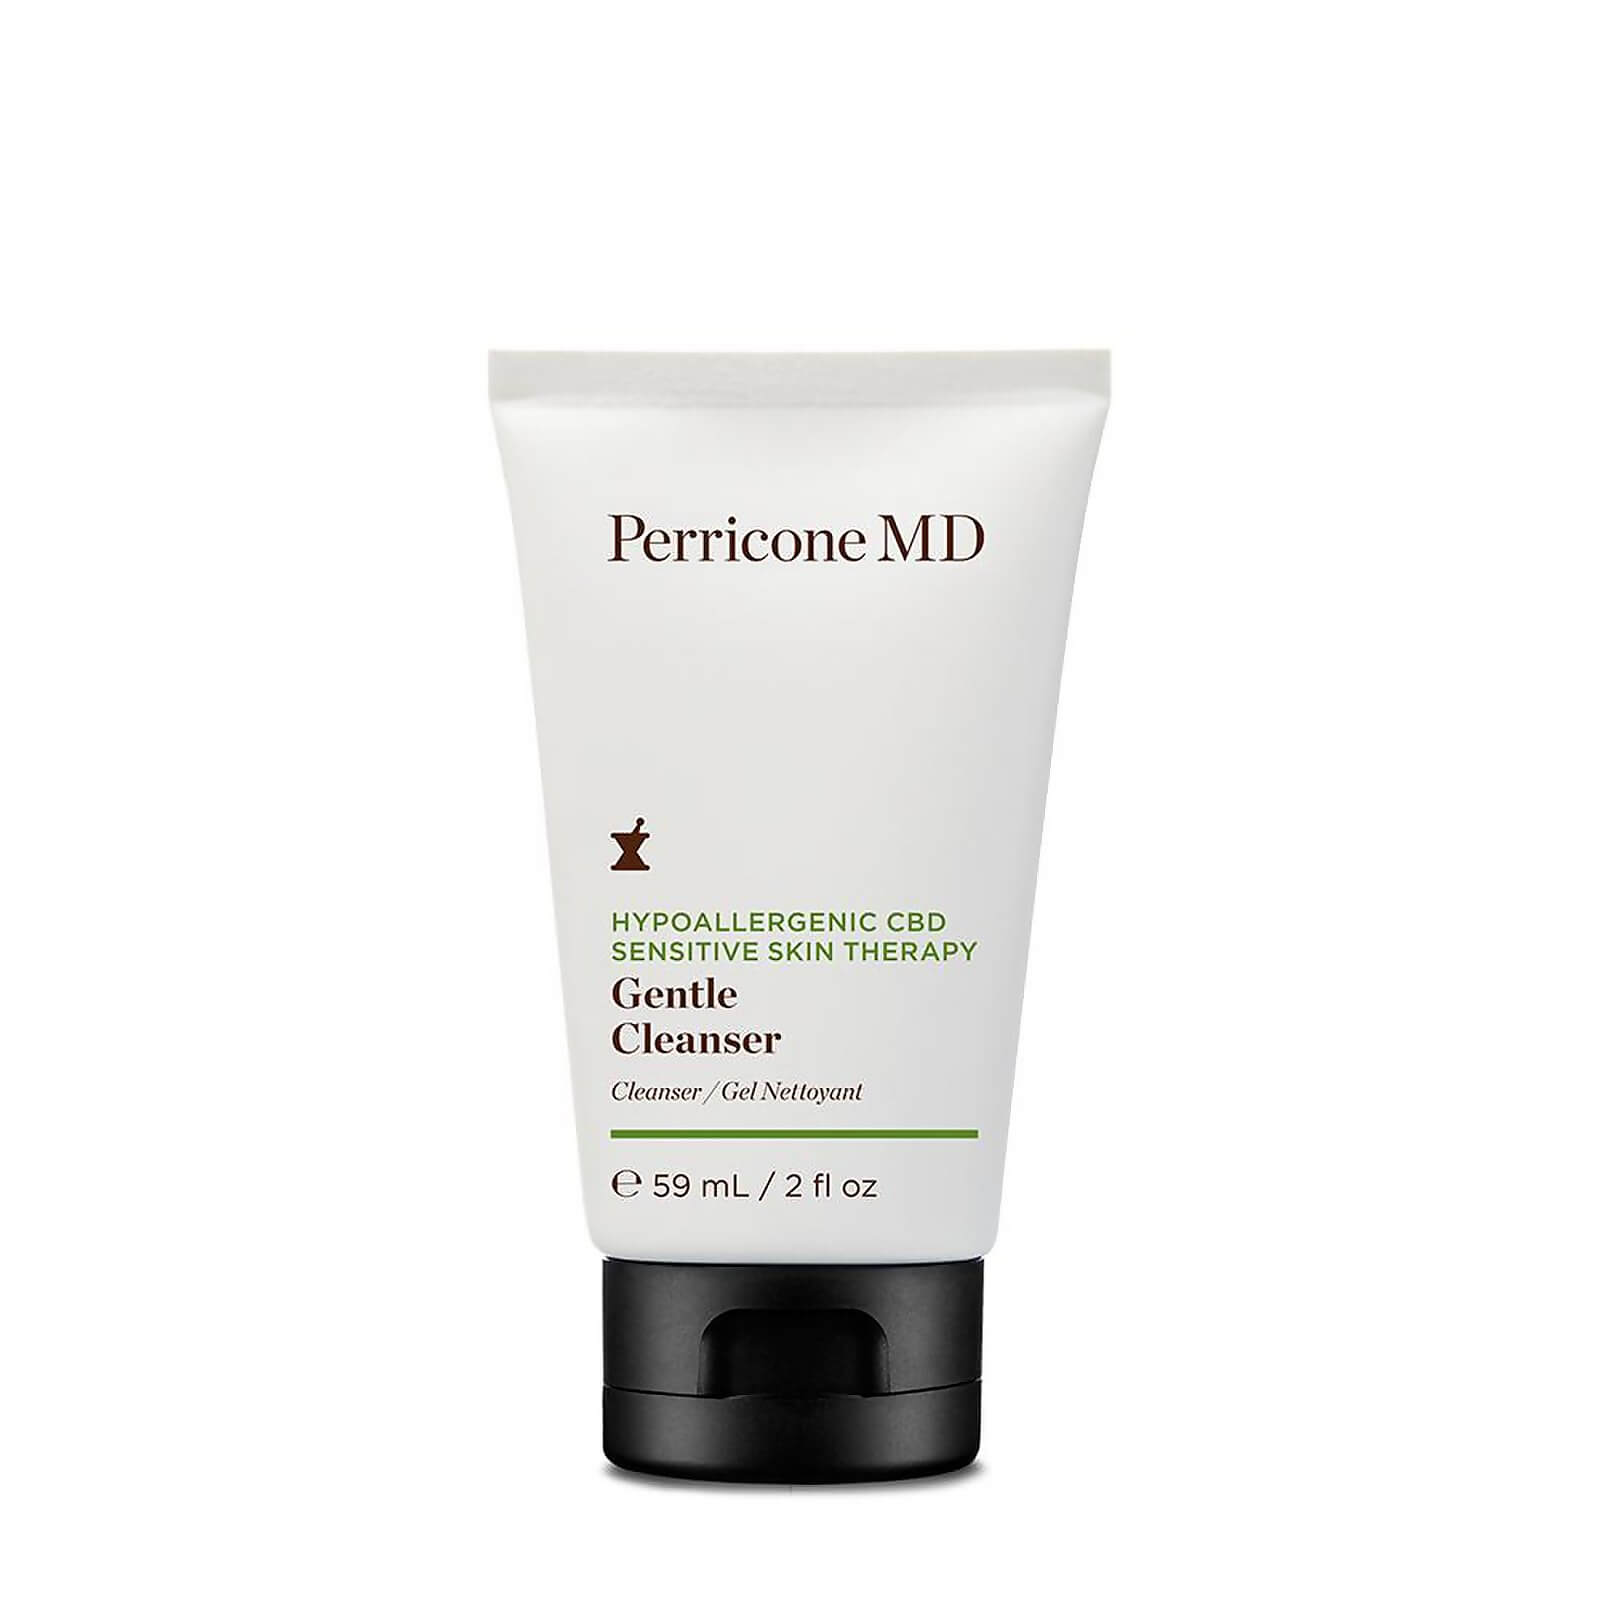 Image of Perricone MD Hypoallergenic CBD Sensitive Skin Therapy Gentle Cleanser Travel Size 59ml